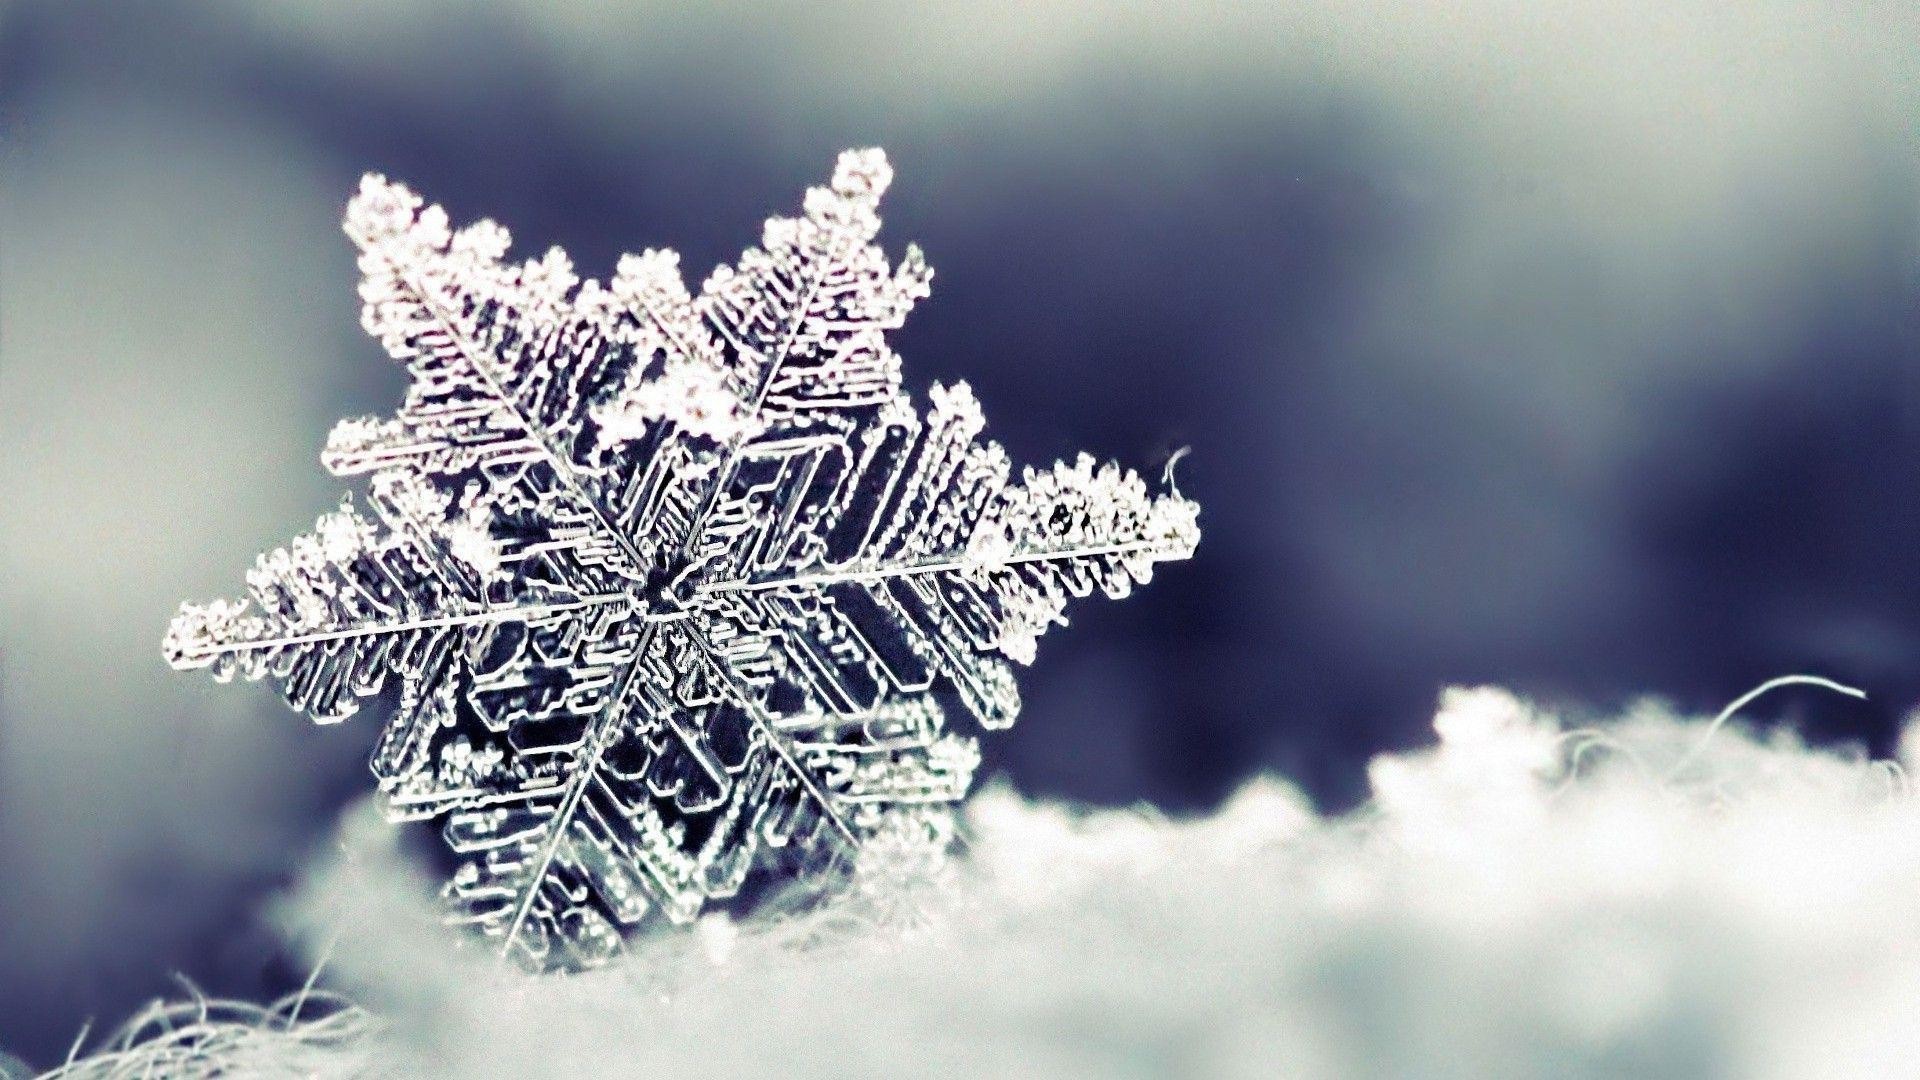 1920x1080 Snowflake Wallpaper Hd Images 3 HD Wallpapers | Hdimges.